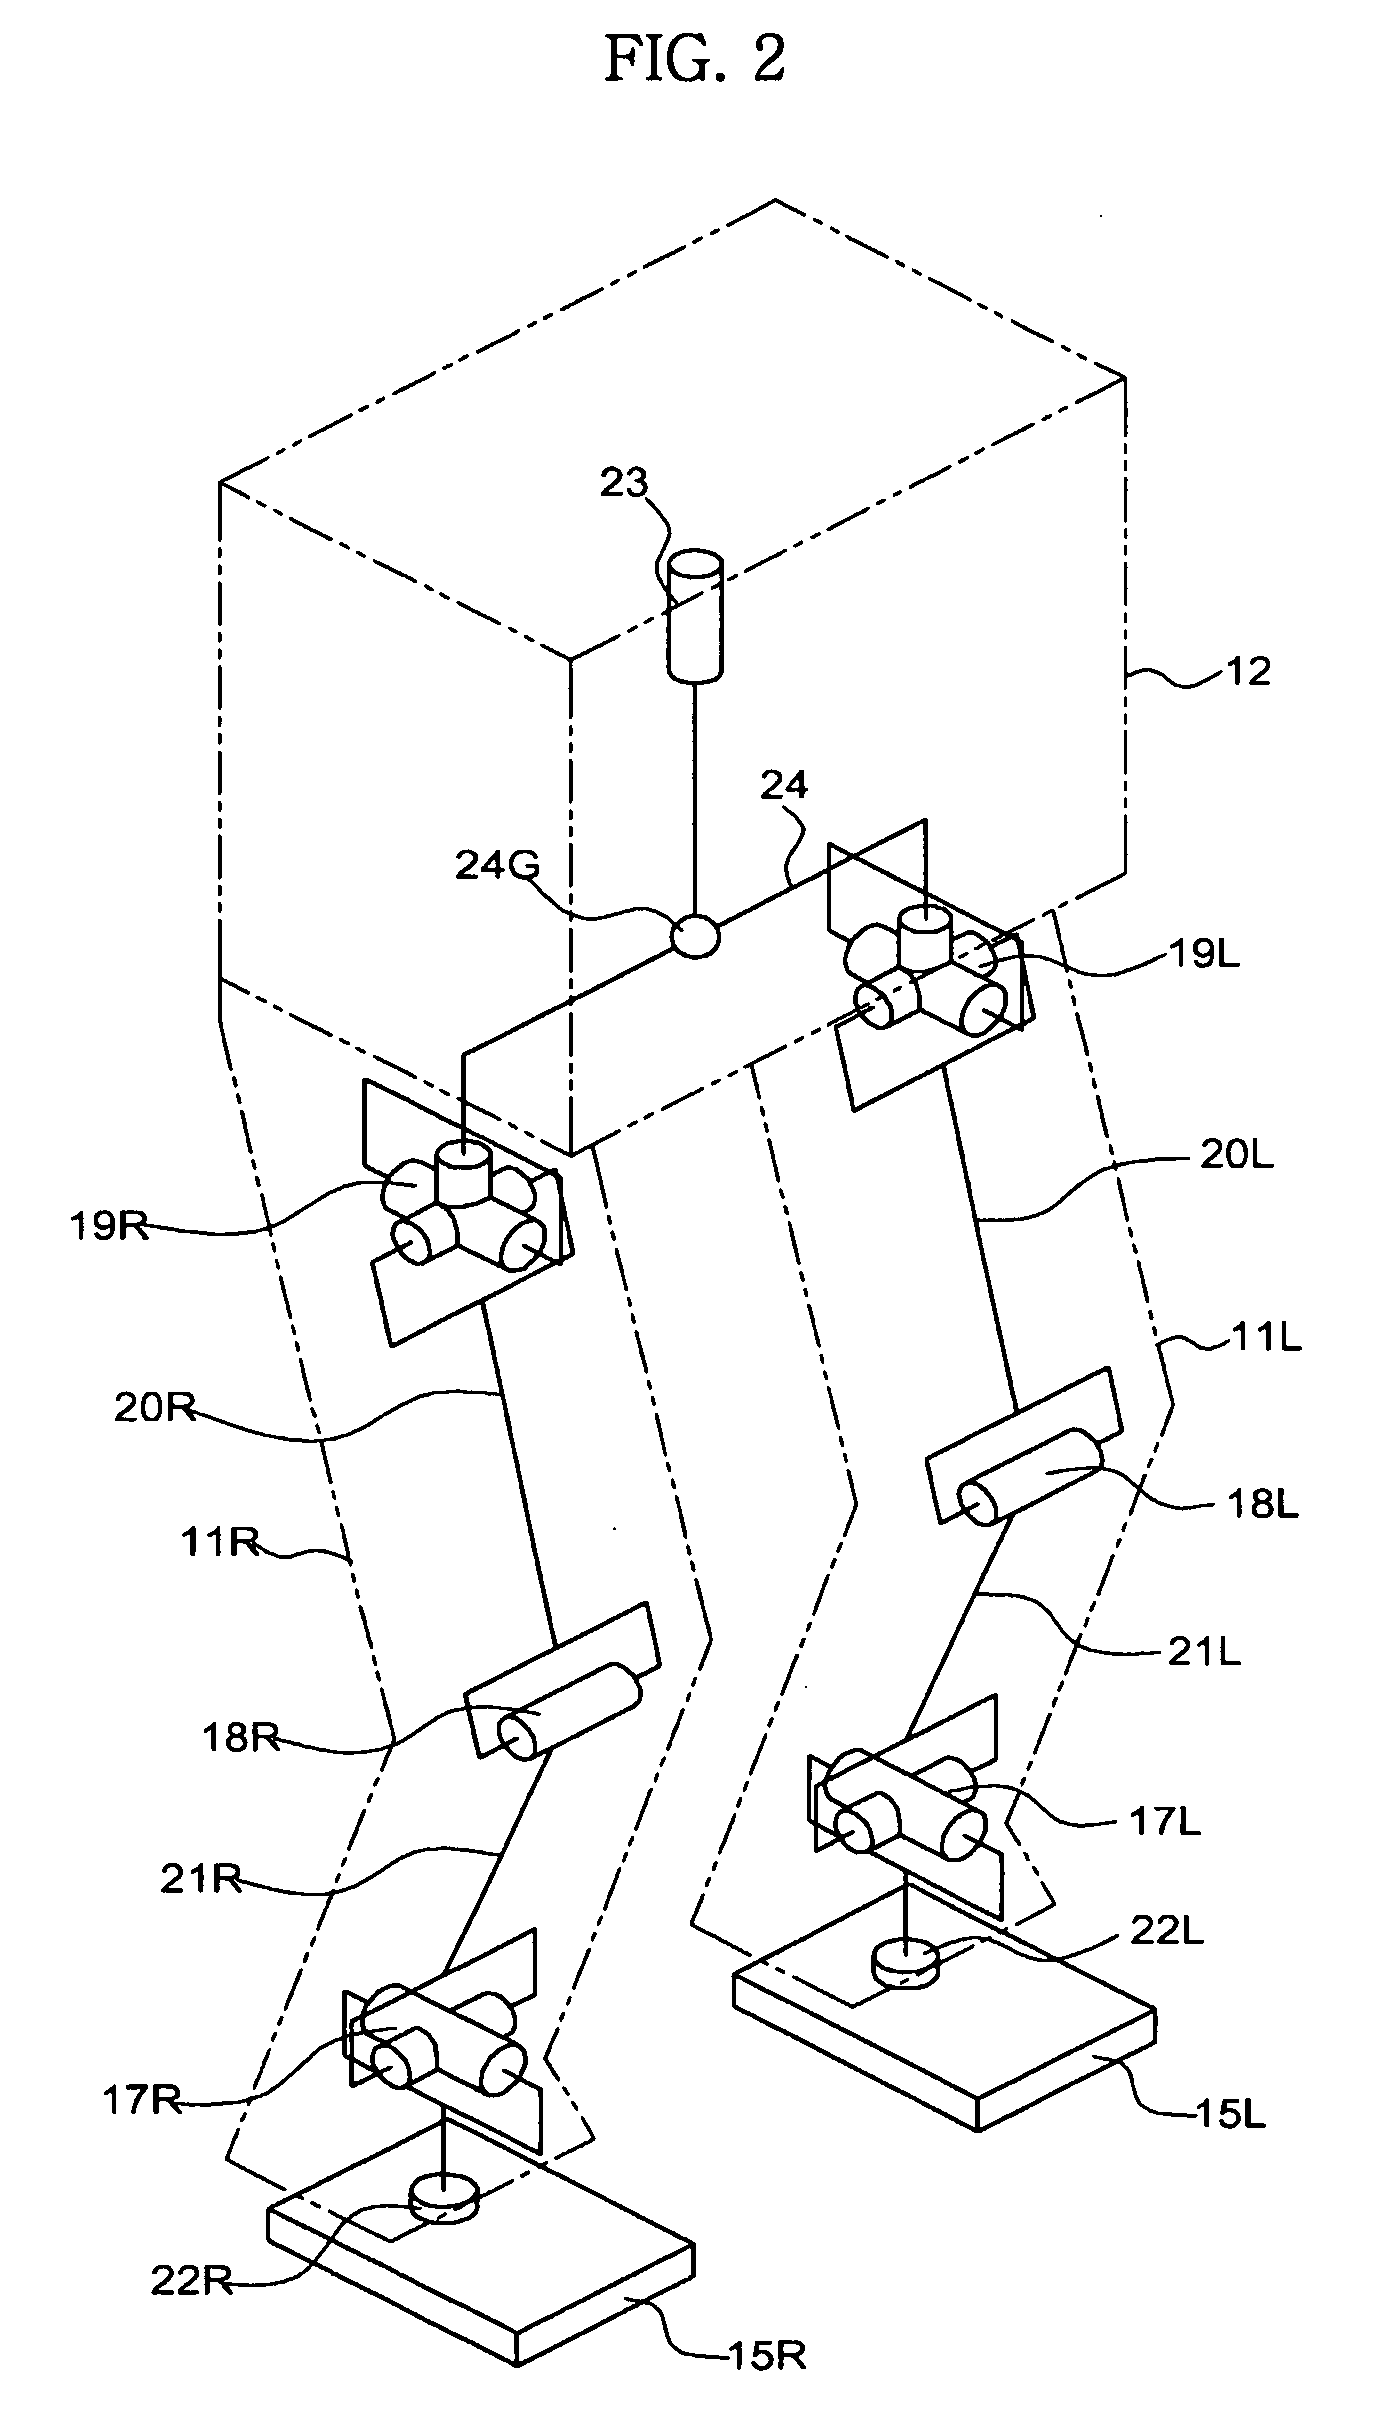 Robot and method of controlling safety thereof